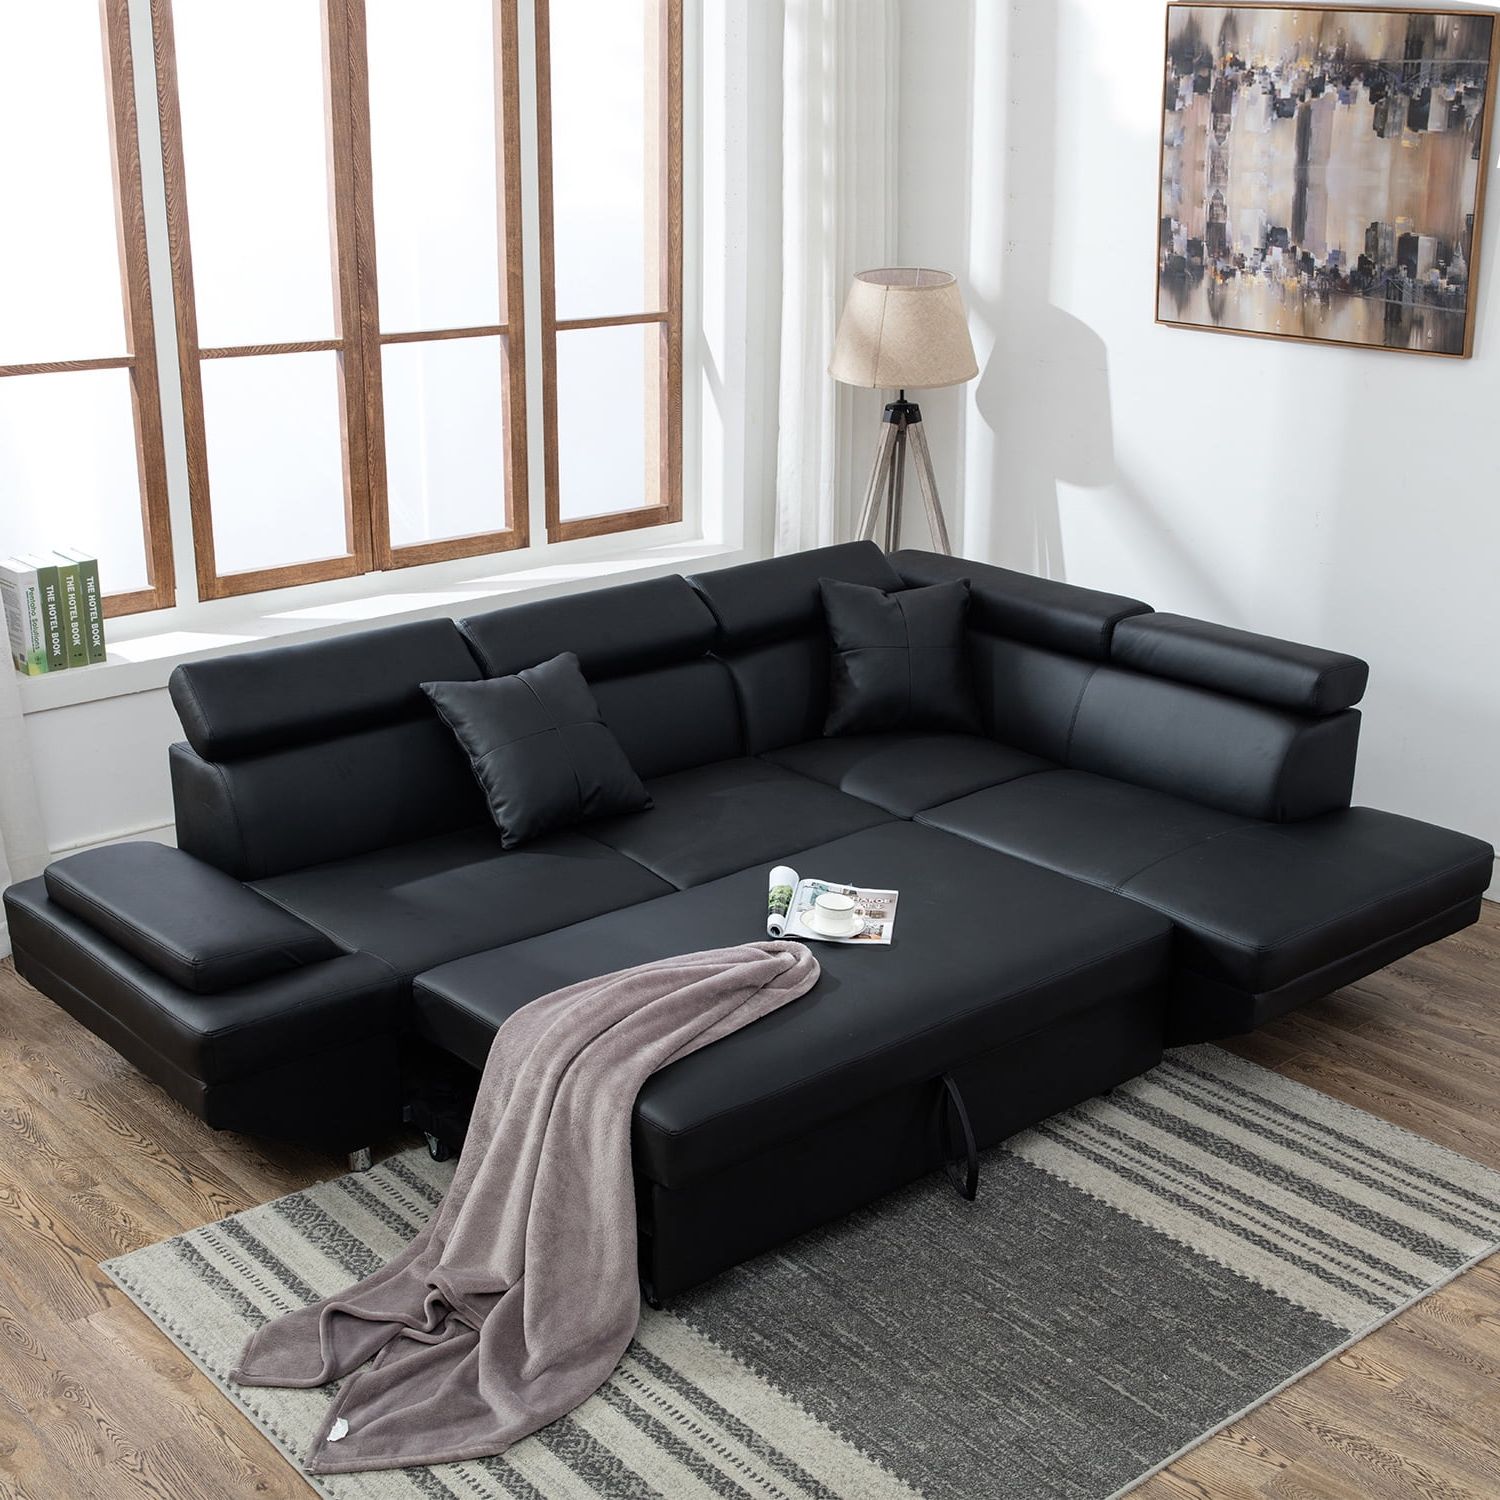 Widely Used 3 Seat L Shaped Sofas In Black For Best Choice Products 3 Seat L Shape Tufted Faux Leather Sectional Sofa (Photo 1 of 15)